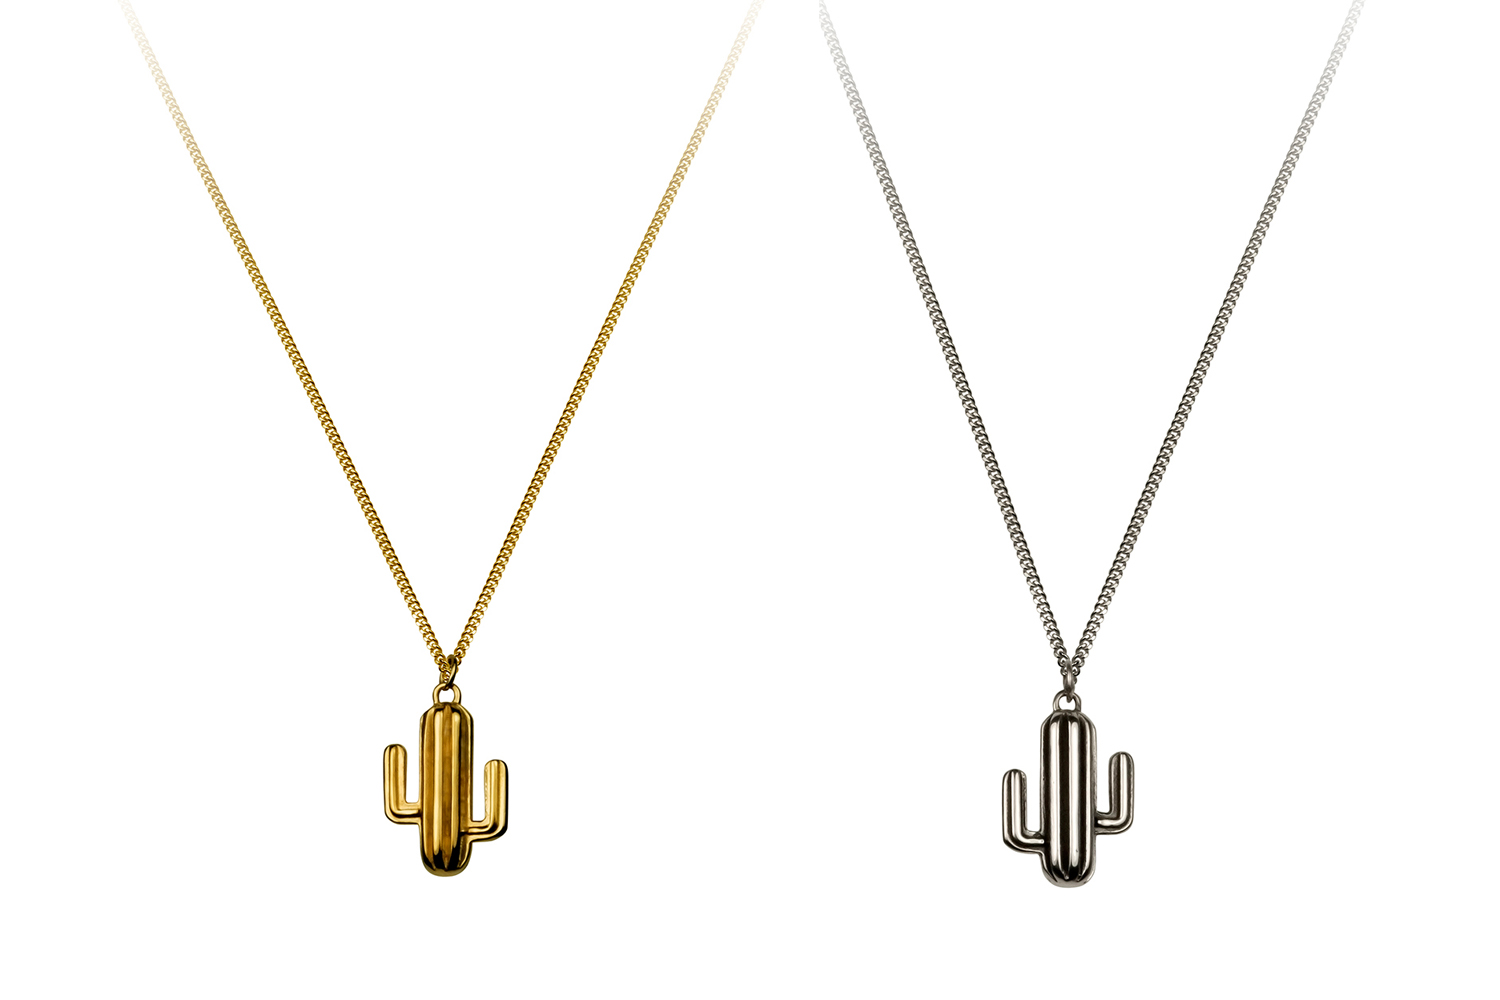 Small Cacti Necklaces in gold and silver